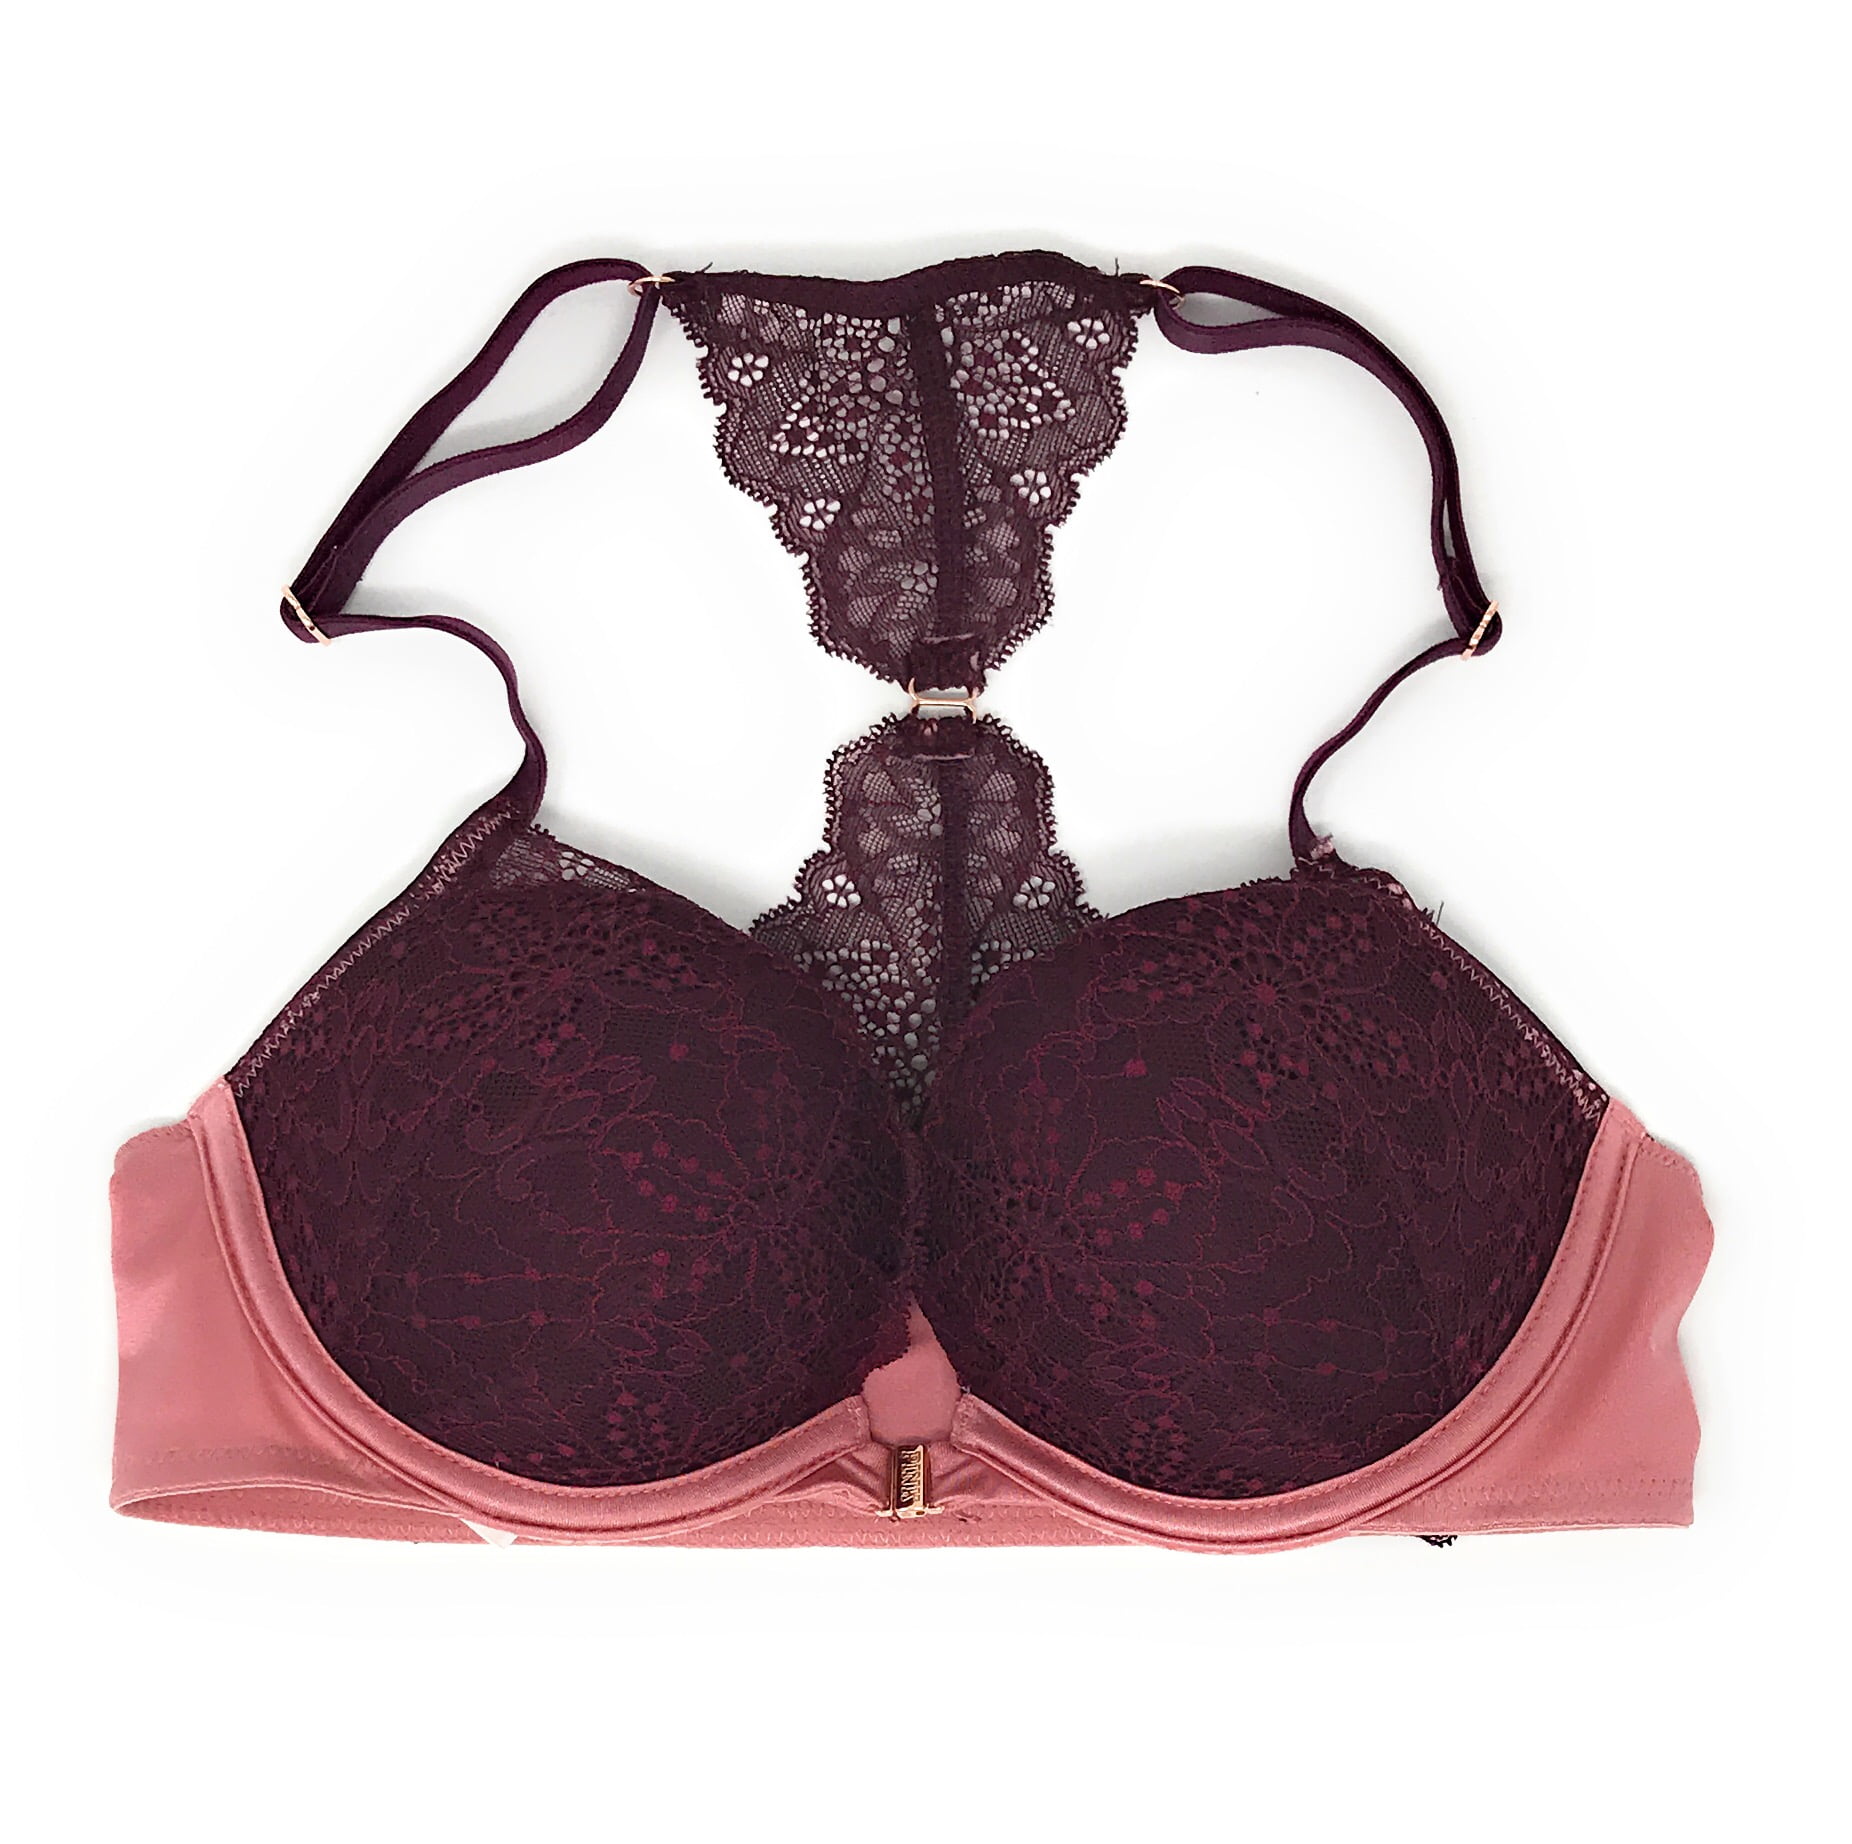 PINK - Victoria's Secret Victoria secret PINK 32C lace bra good condition  Black Size undefined - $15 - From Kay